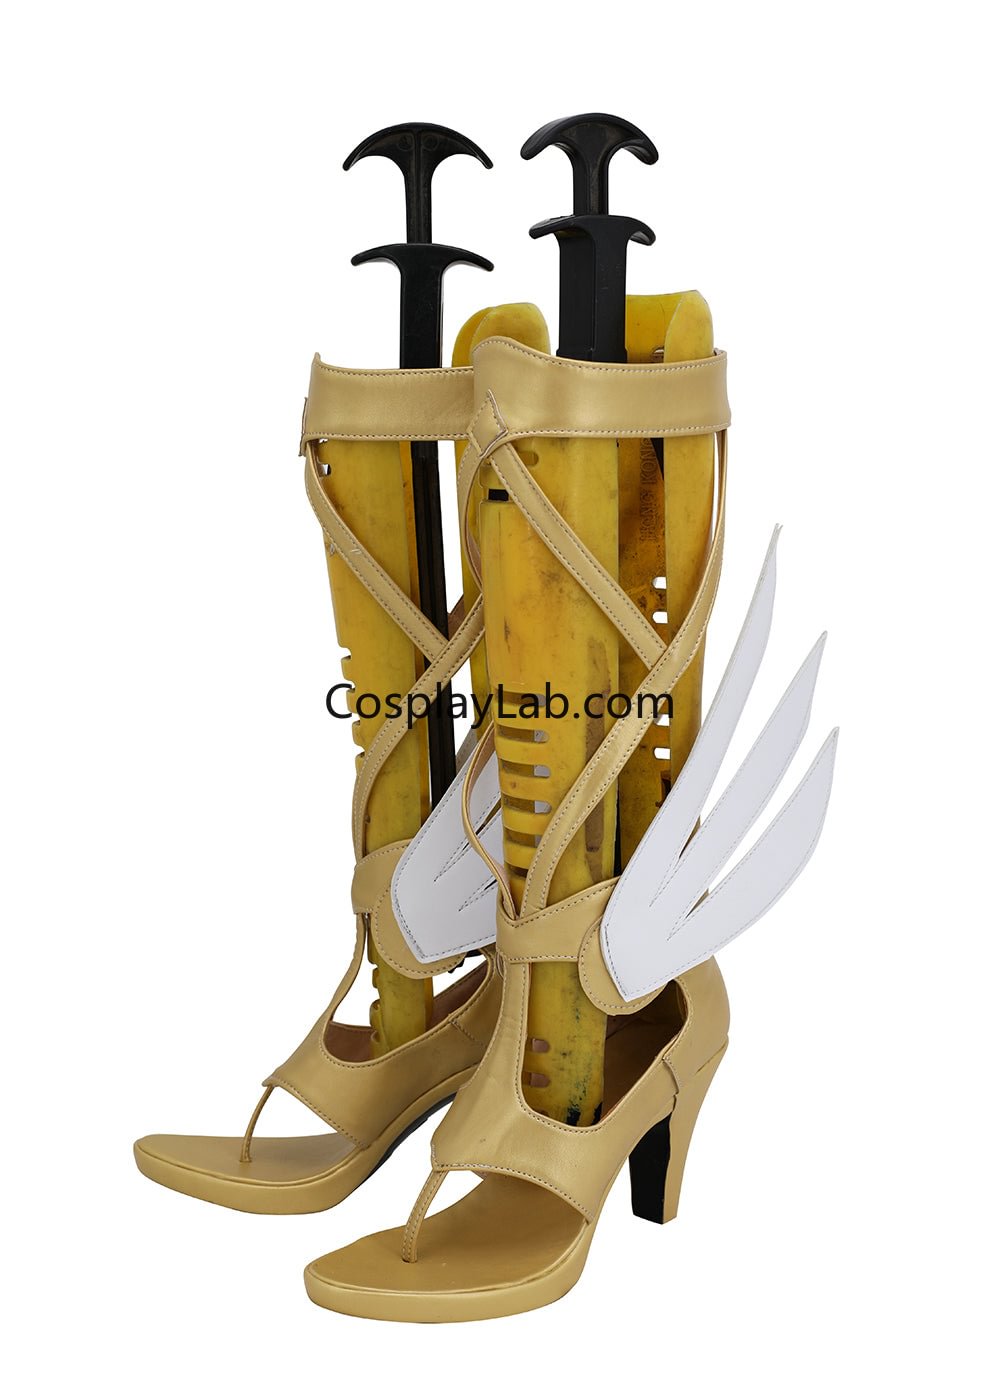 Overwatch OW Mercy Cosplay Shoes Boots